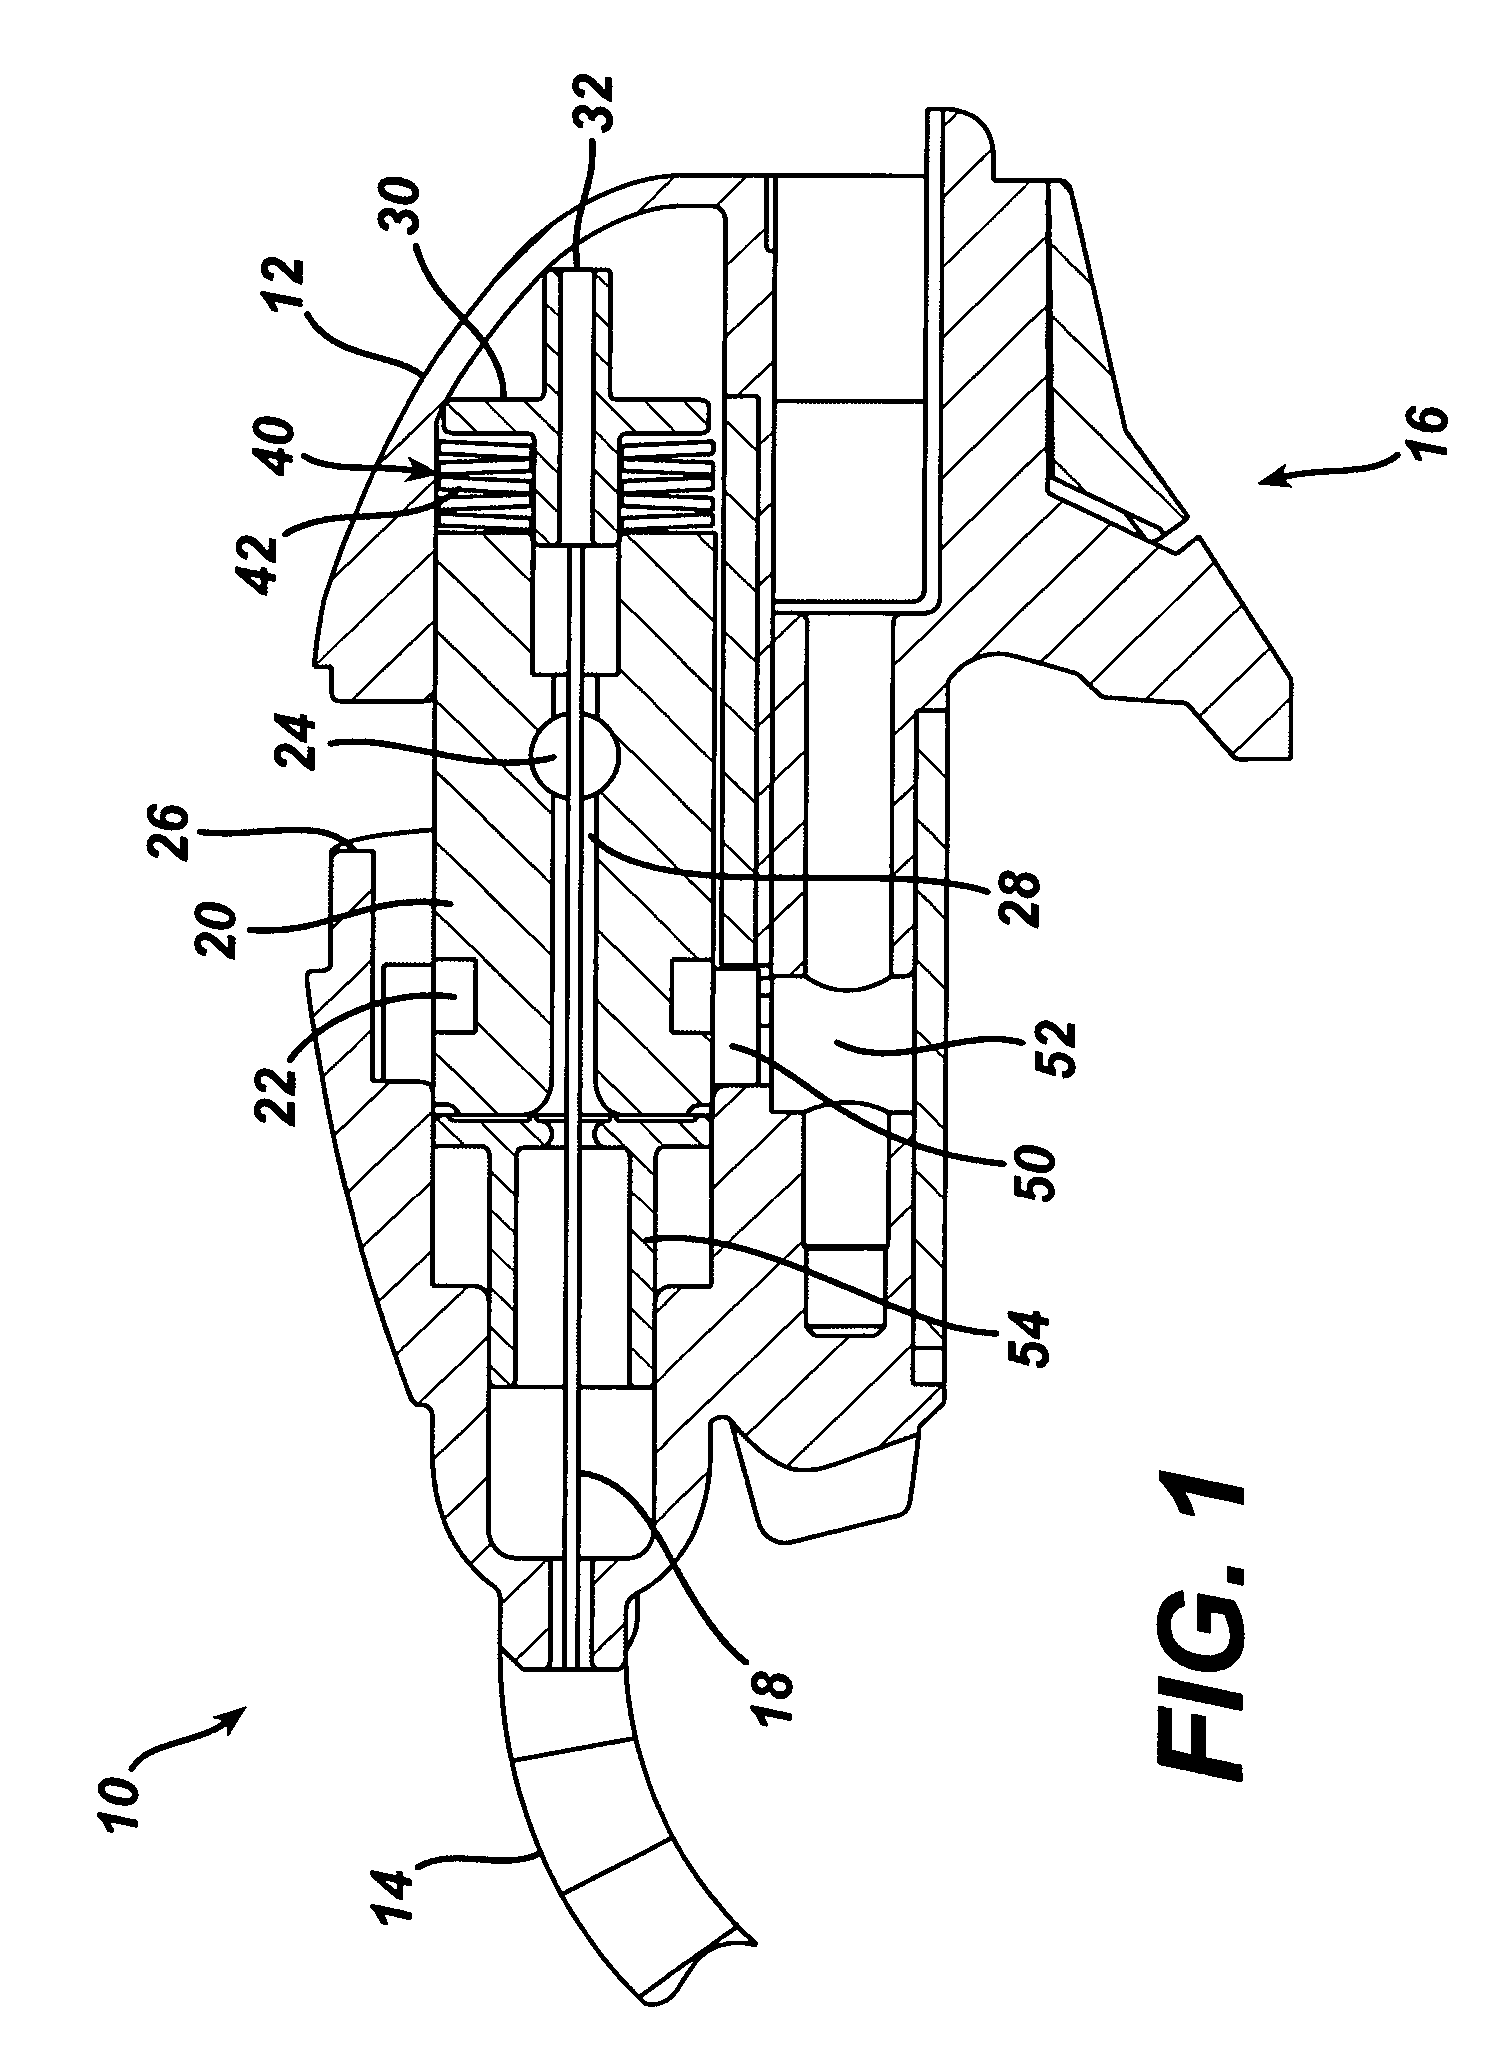 Flexible shaft stabilizing devices with improved actuation